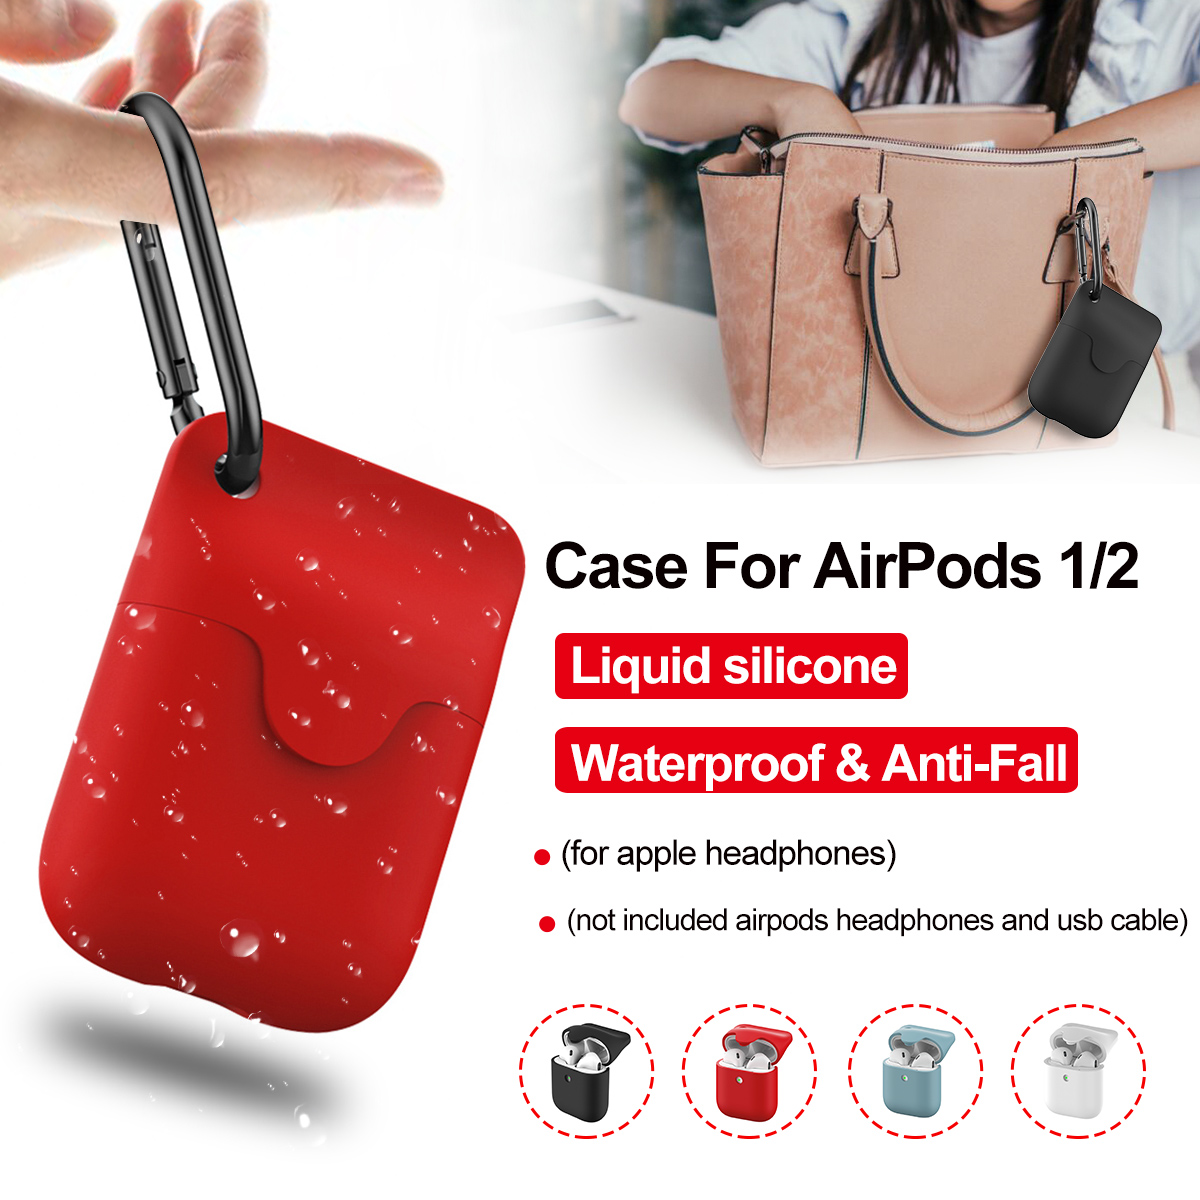 Liquid-Silicone-Shockproof-Waterproof-Earphone-Storage-Case-with-KeyChain-for-Apple-Airpods-1--2-1648016-1